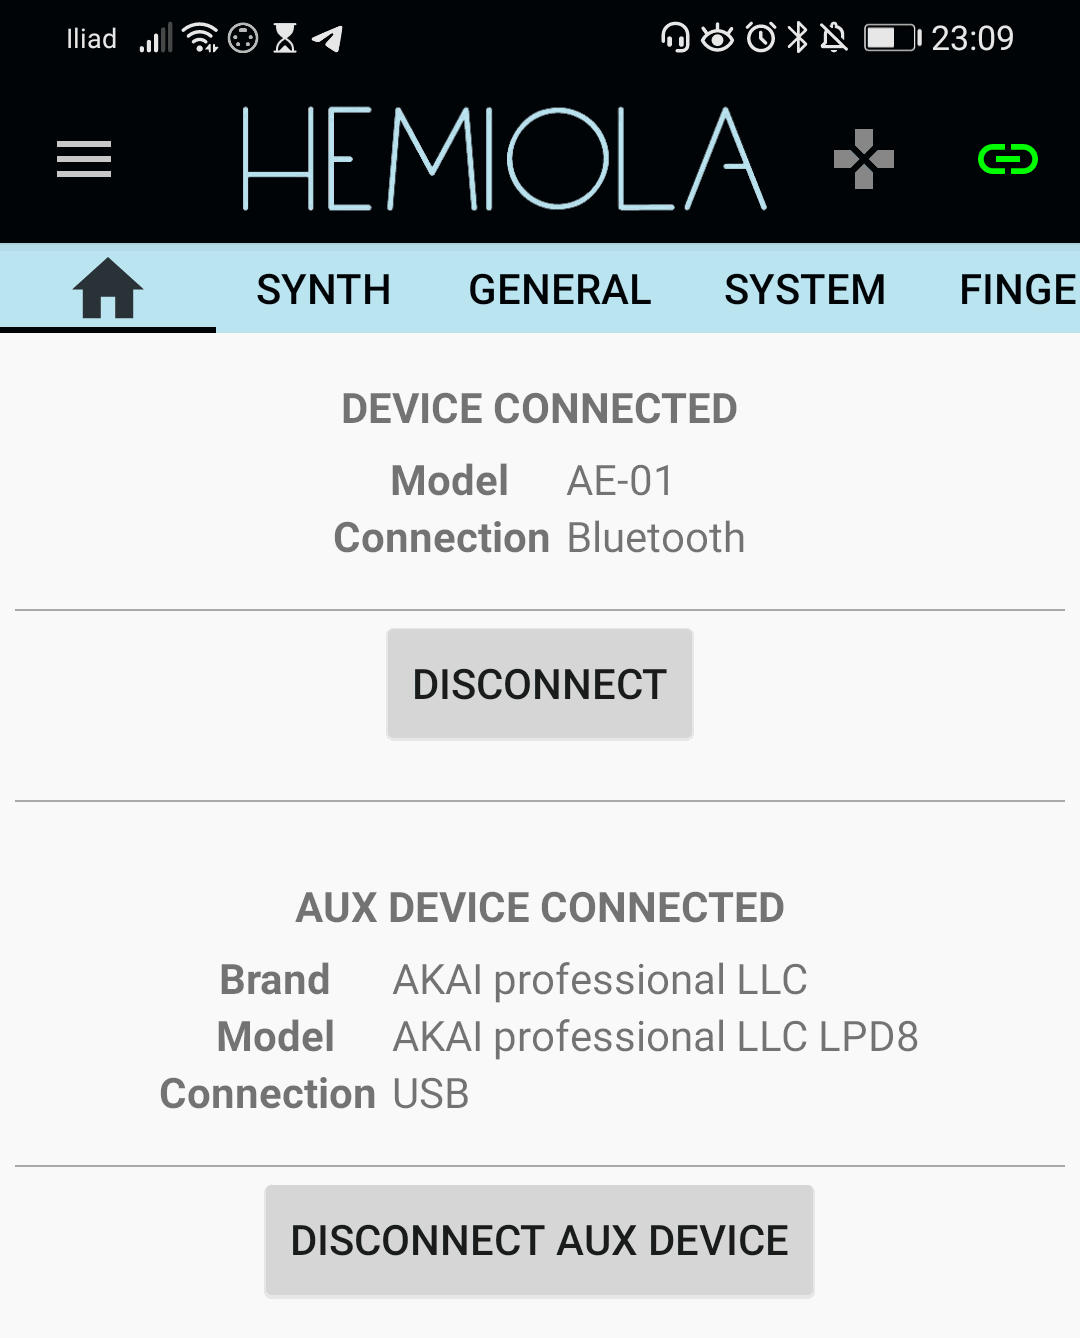 Gianluca Barbaro's Roland Mini Blog - Hemiola Android app - Multiple connections